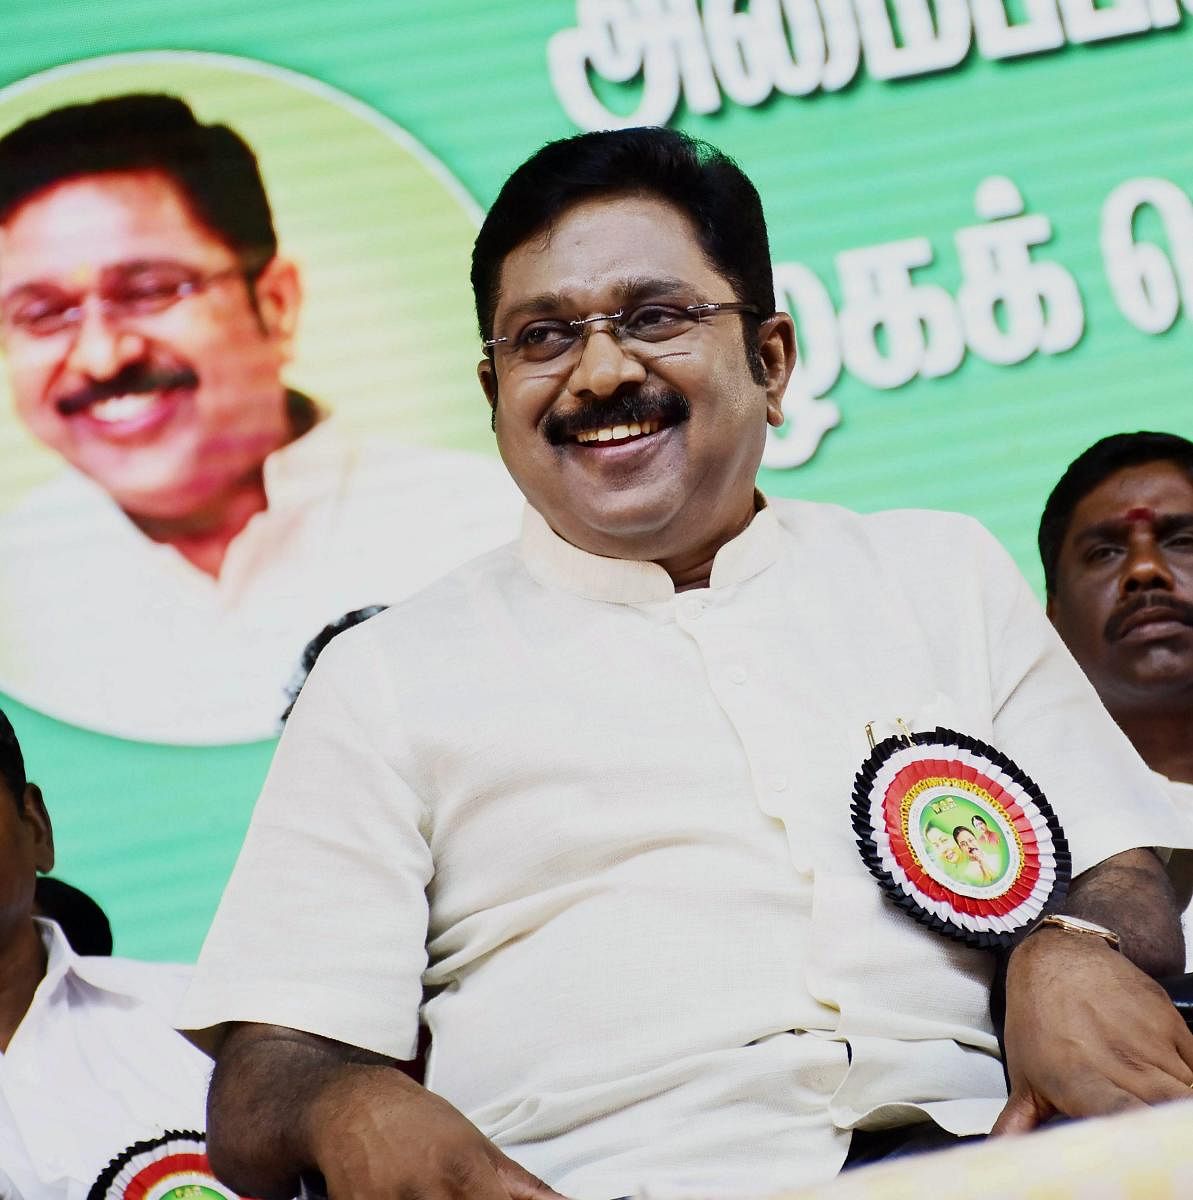 Amma Makkal Munnetra Kazhagam (AMMK) led by AIADMK rebel T T V Dhinakaran will not field its candidate in the August 5 elections to Vellore Lok Sabha constituency. The party’s chief Dhinakaran told reporters on Monday that the AMMK would contest polls only after the process of registering the outfit as a party was over. PTI file photo